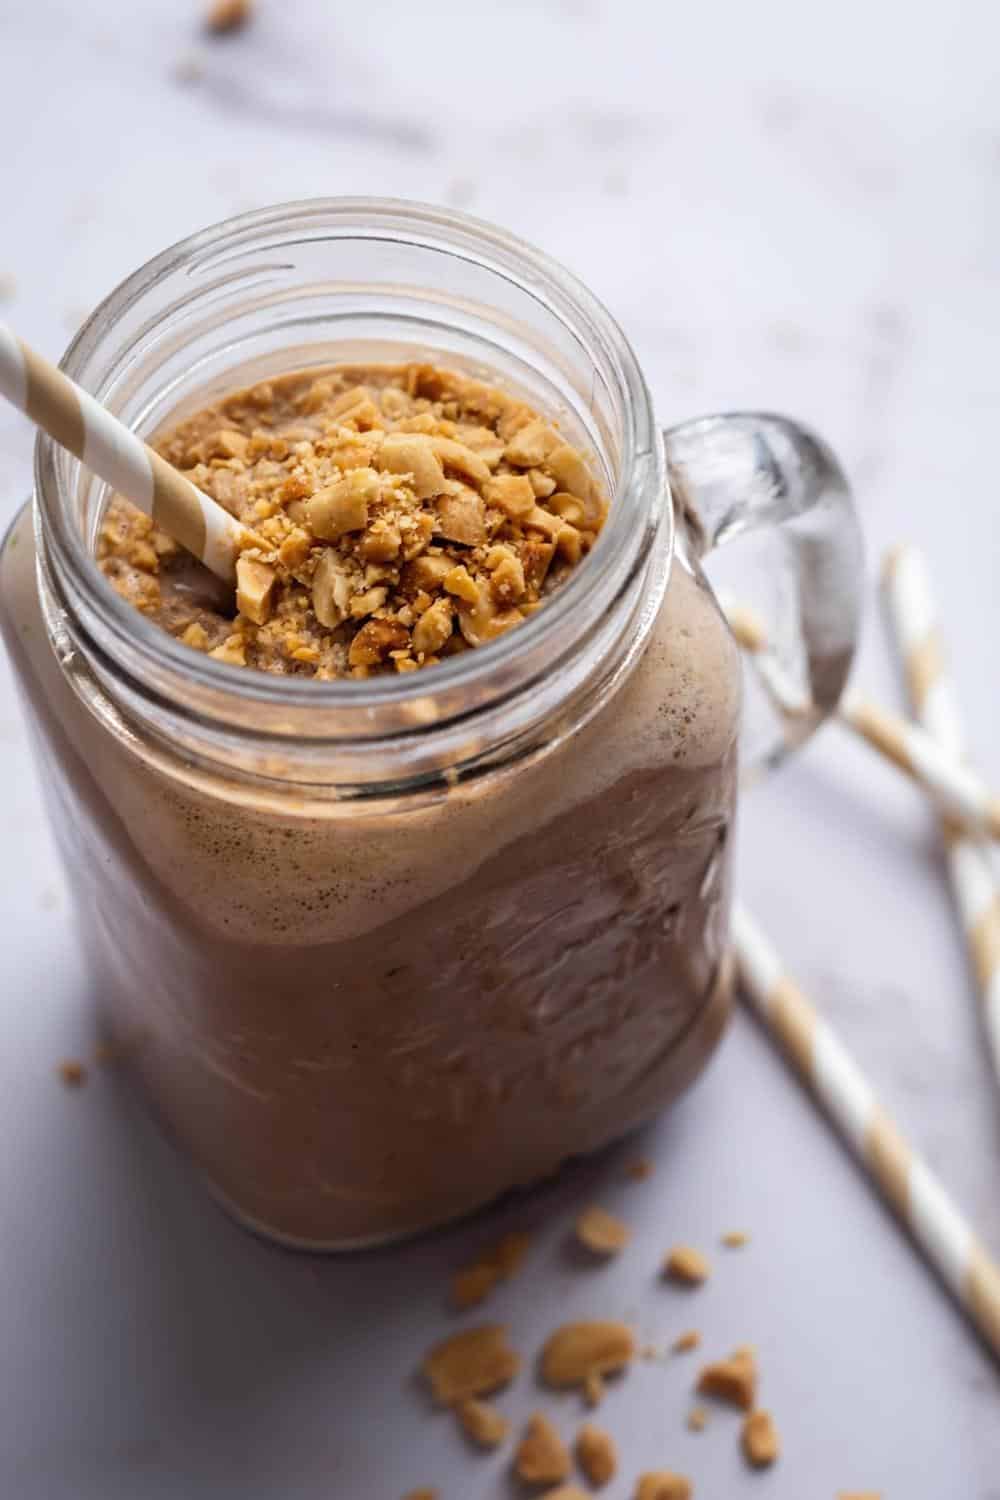 A glass mug with a keto smoothie in it with crushed peanuts on top.